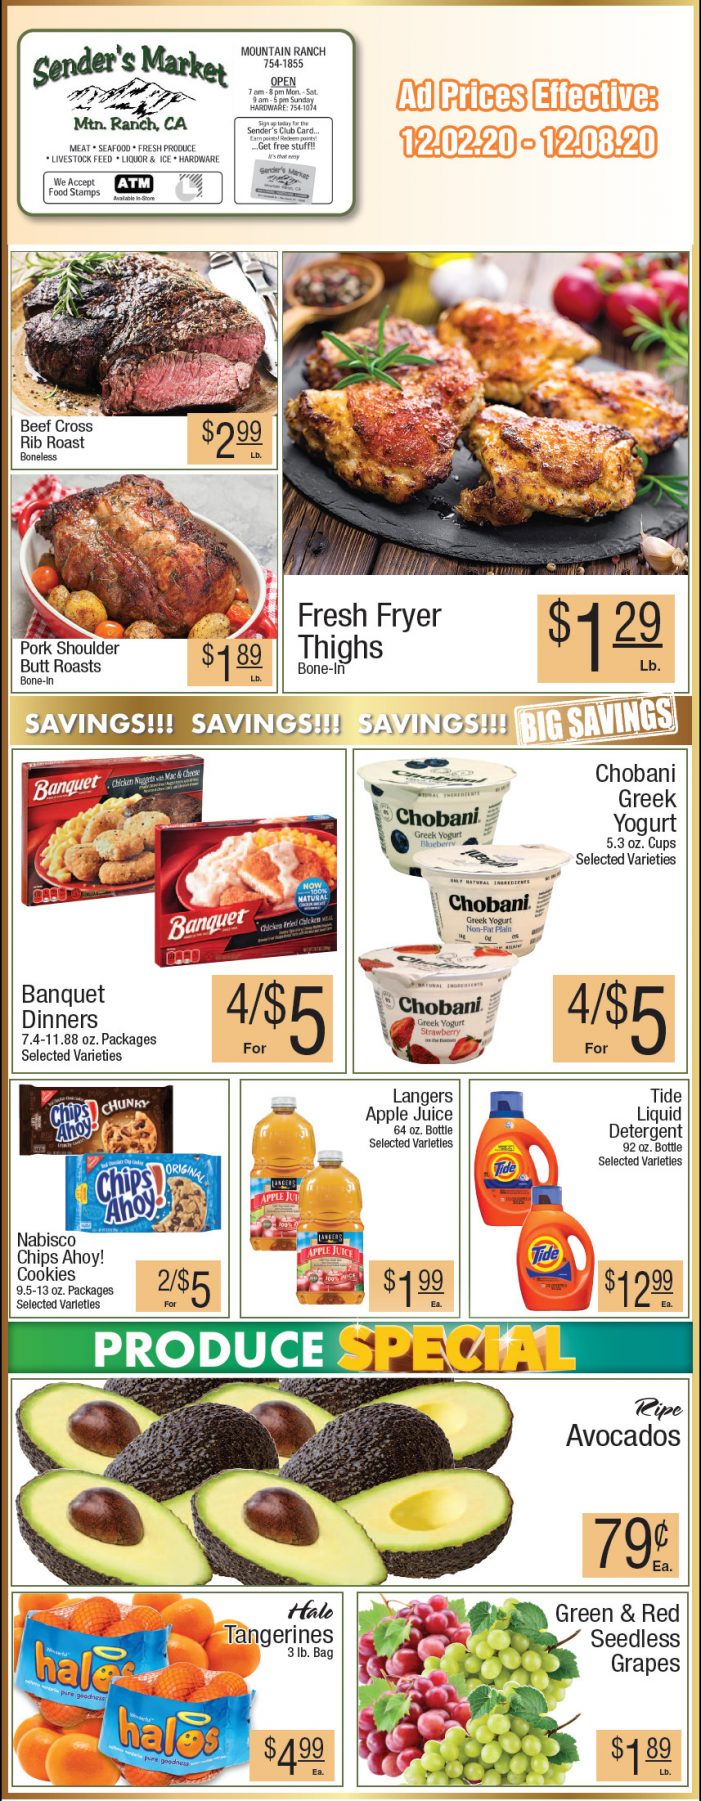 Sender’s Market’s Weekly Ad & Grocery Specials Through December 8th!  Shop Local & Save!